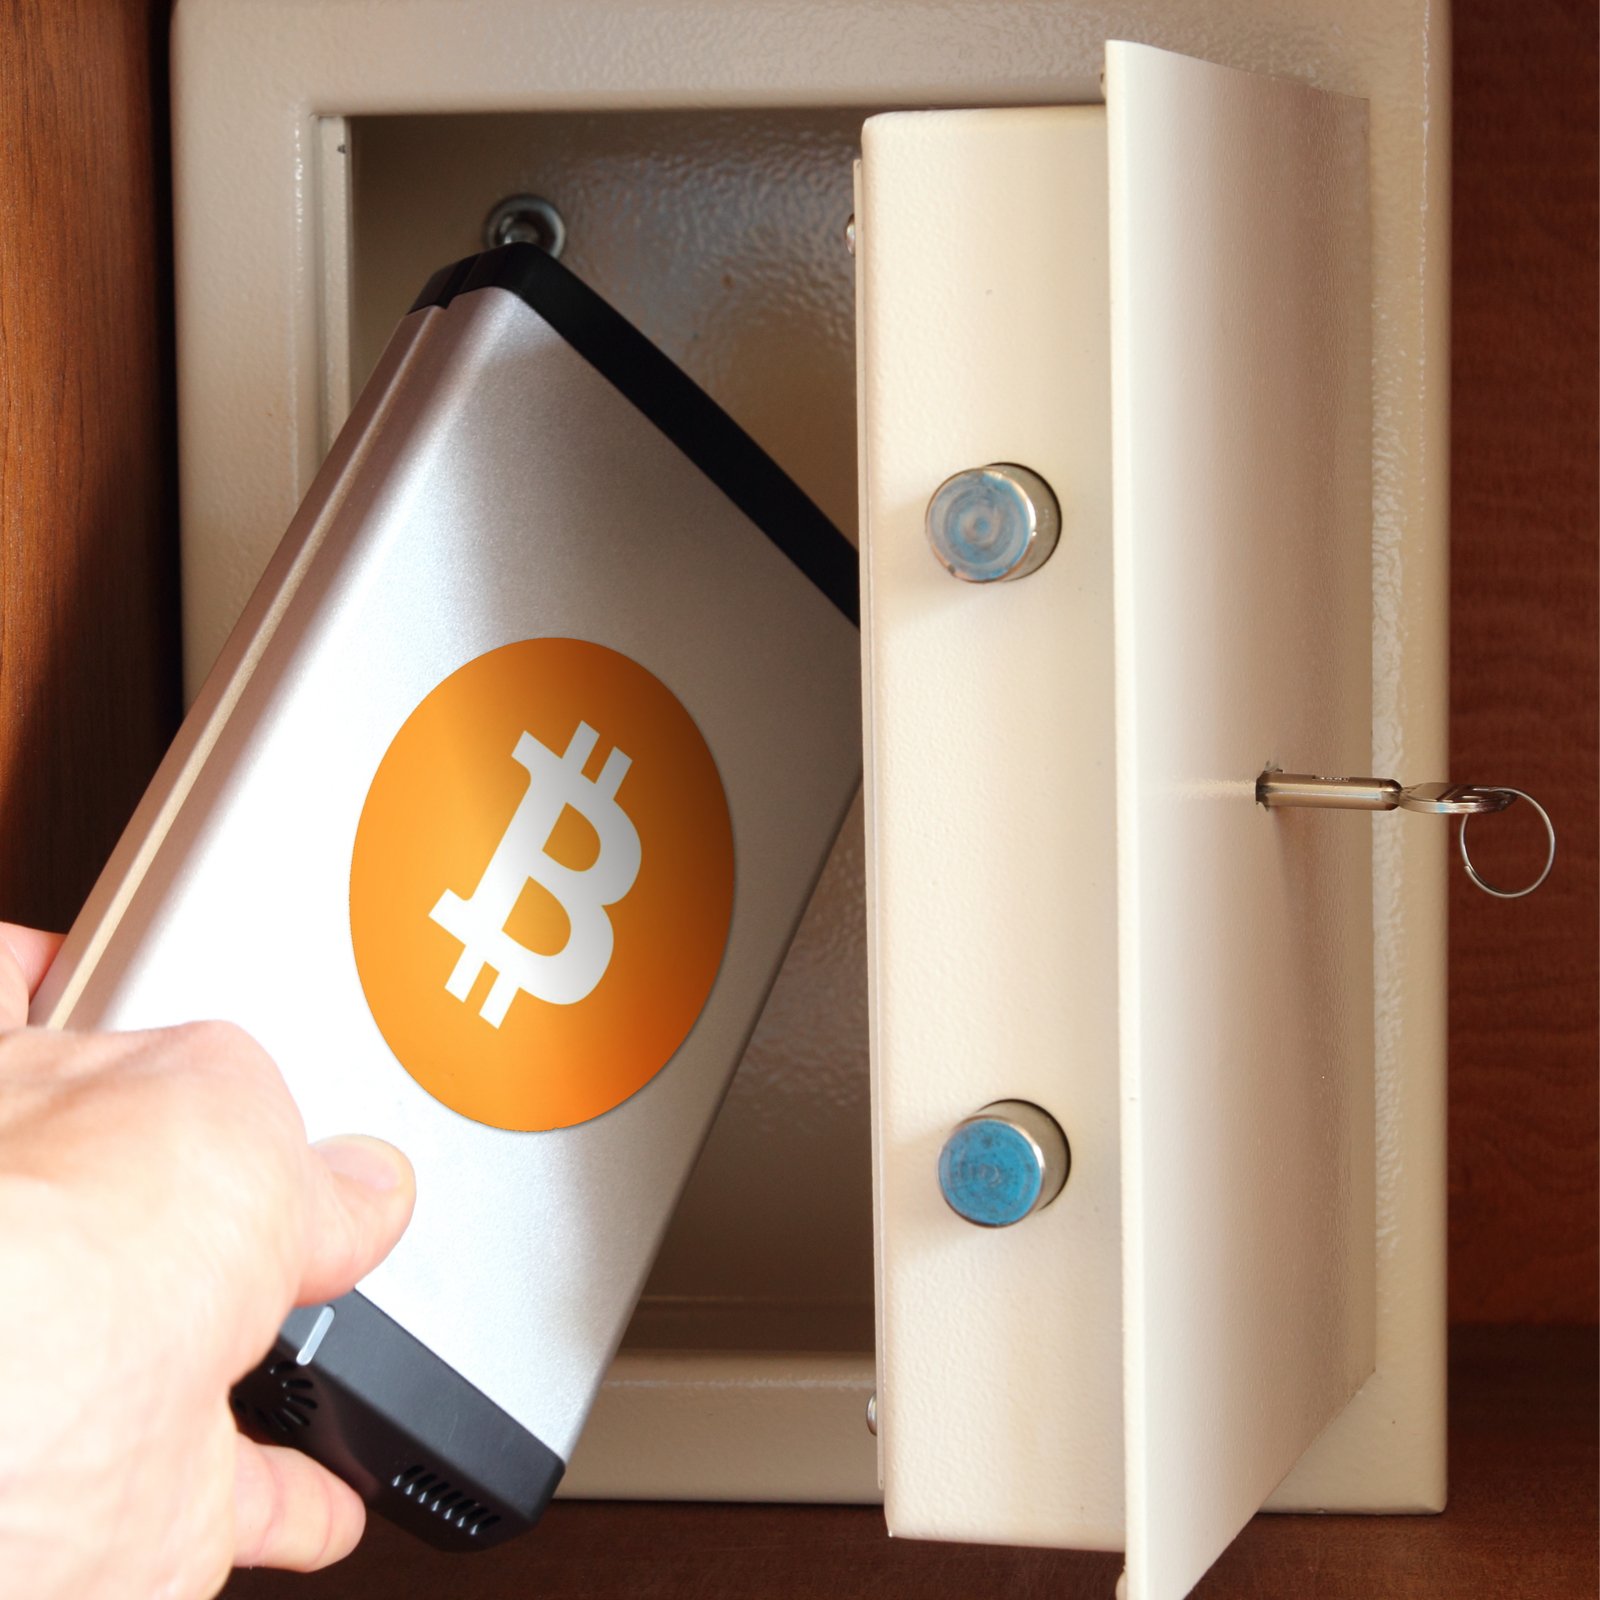 Chinese Programmer Arrested Over ¥20 Million Bitcoin Theft